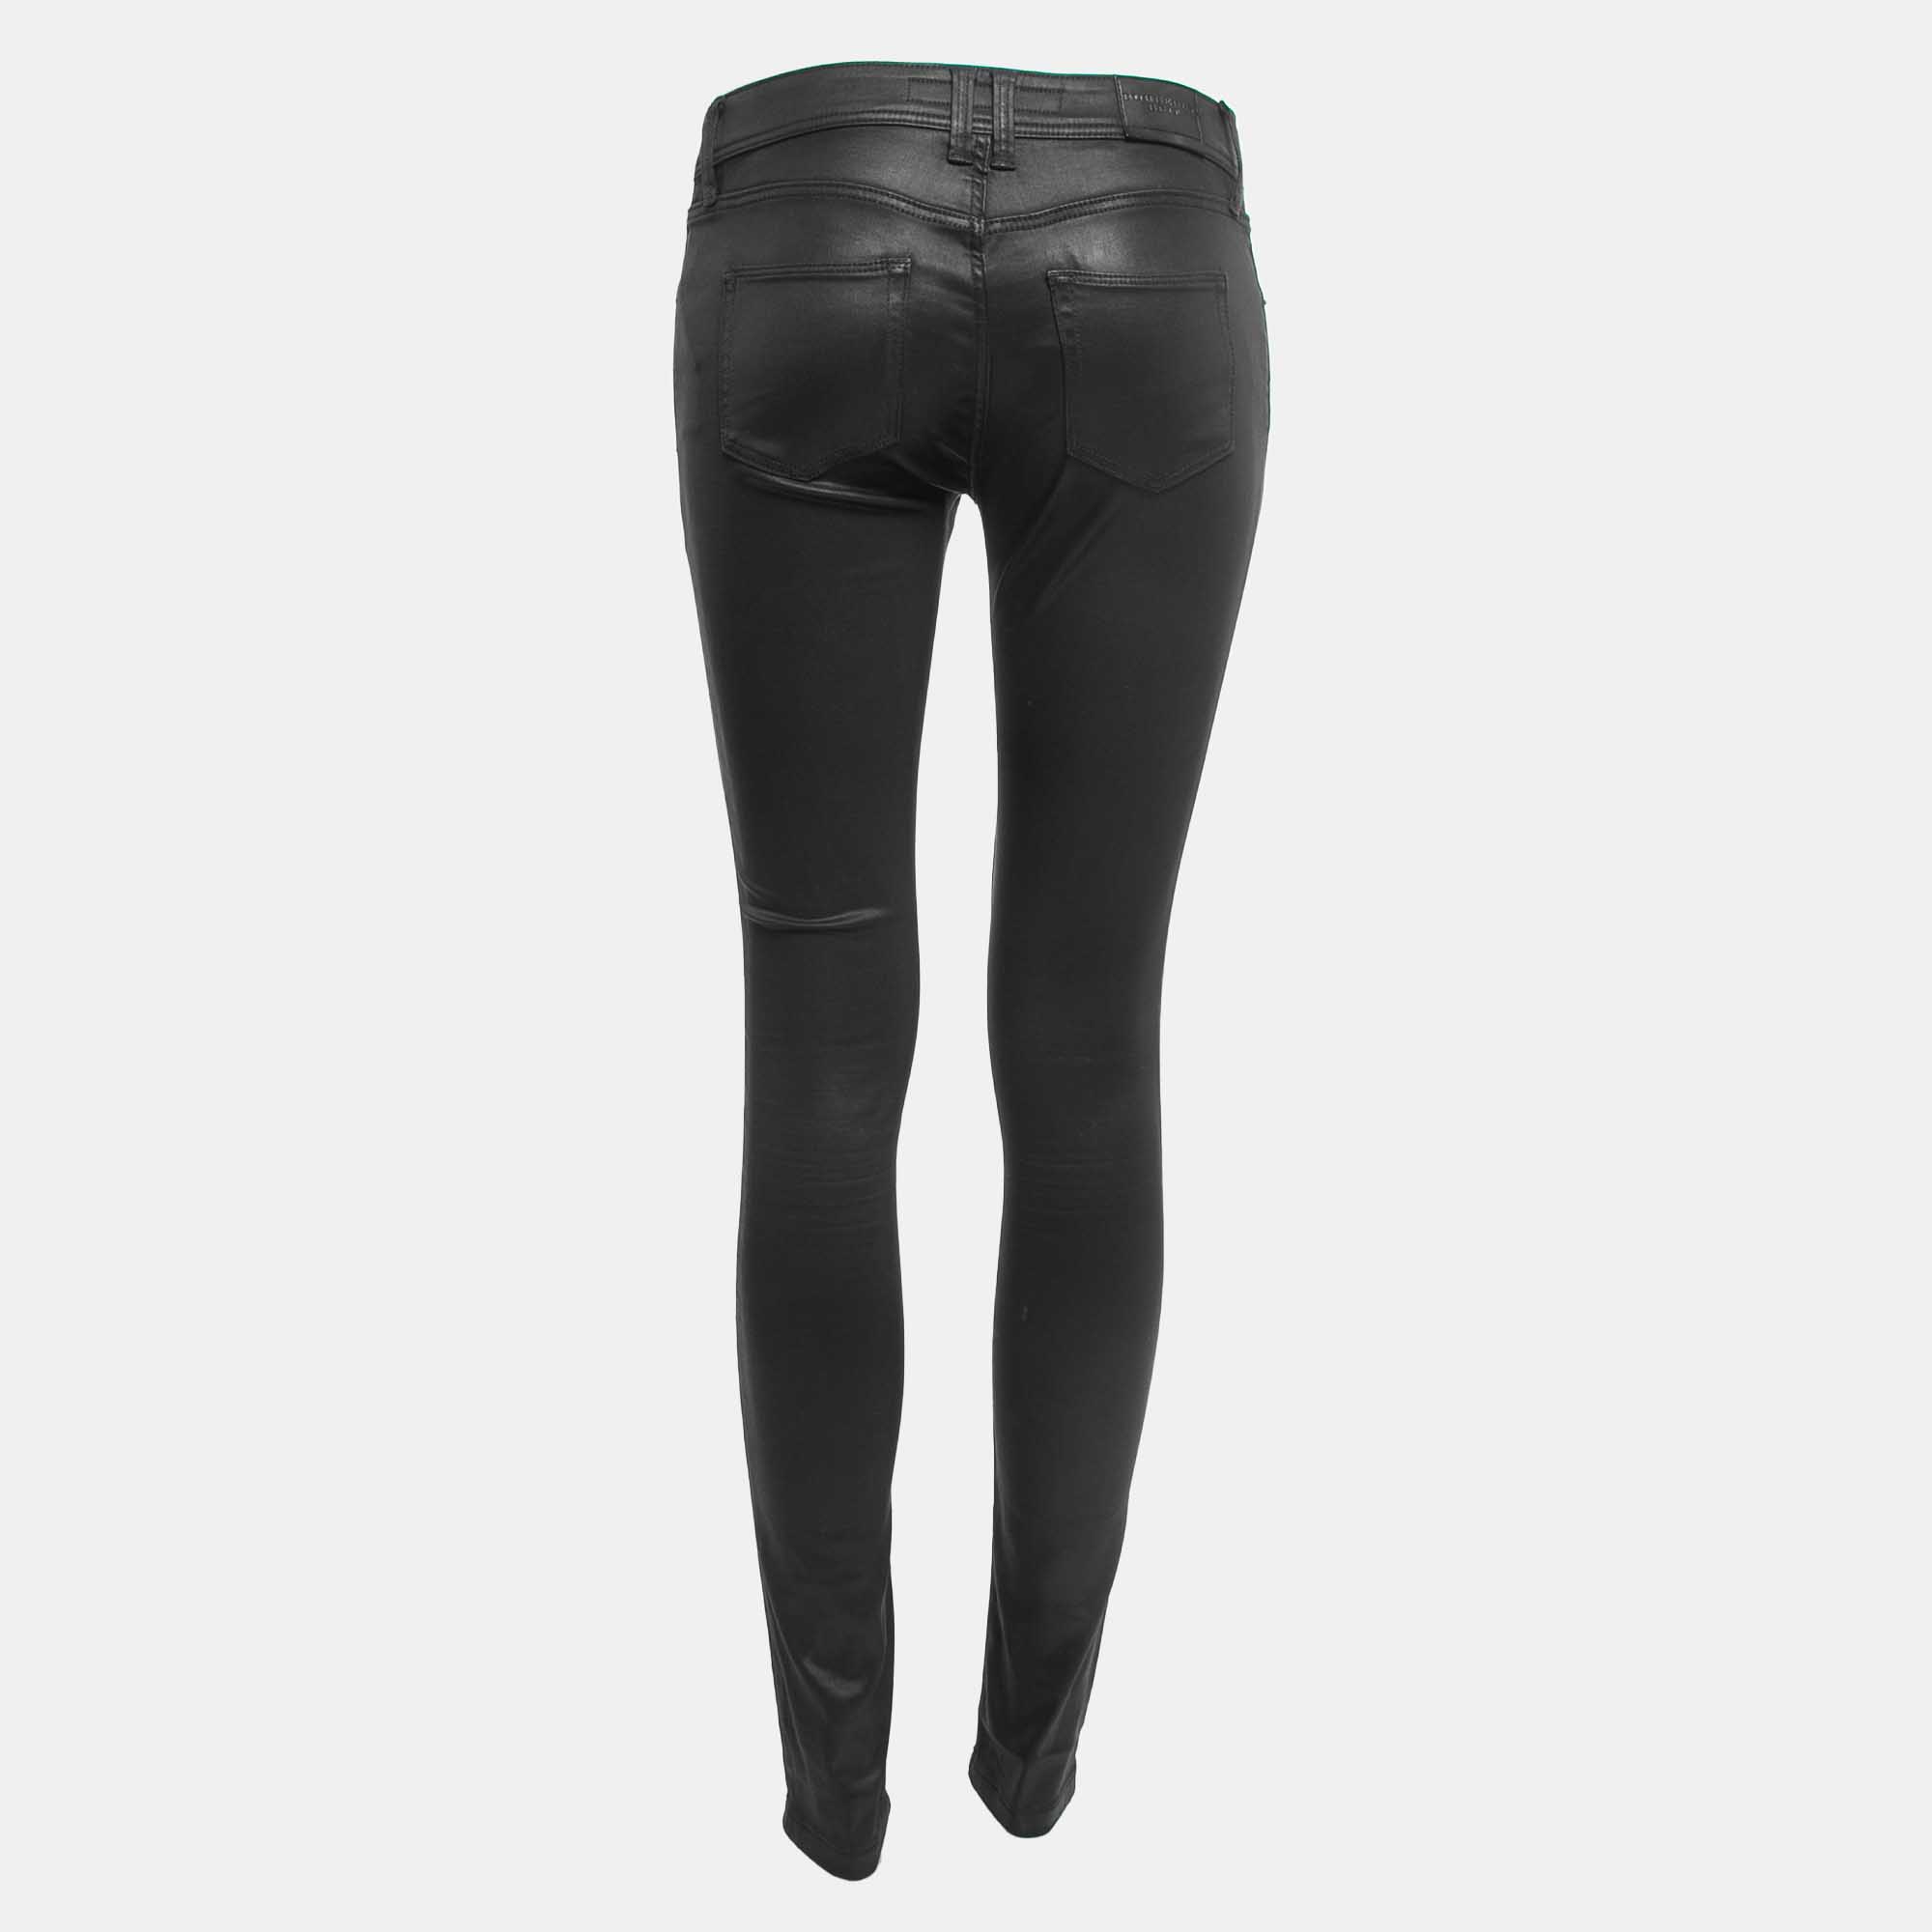 

Burberry Brit Black Coated Cotton Low Rise Skinny Jeans  Waist 26